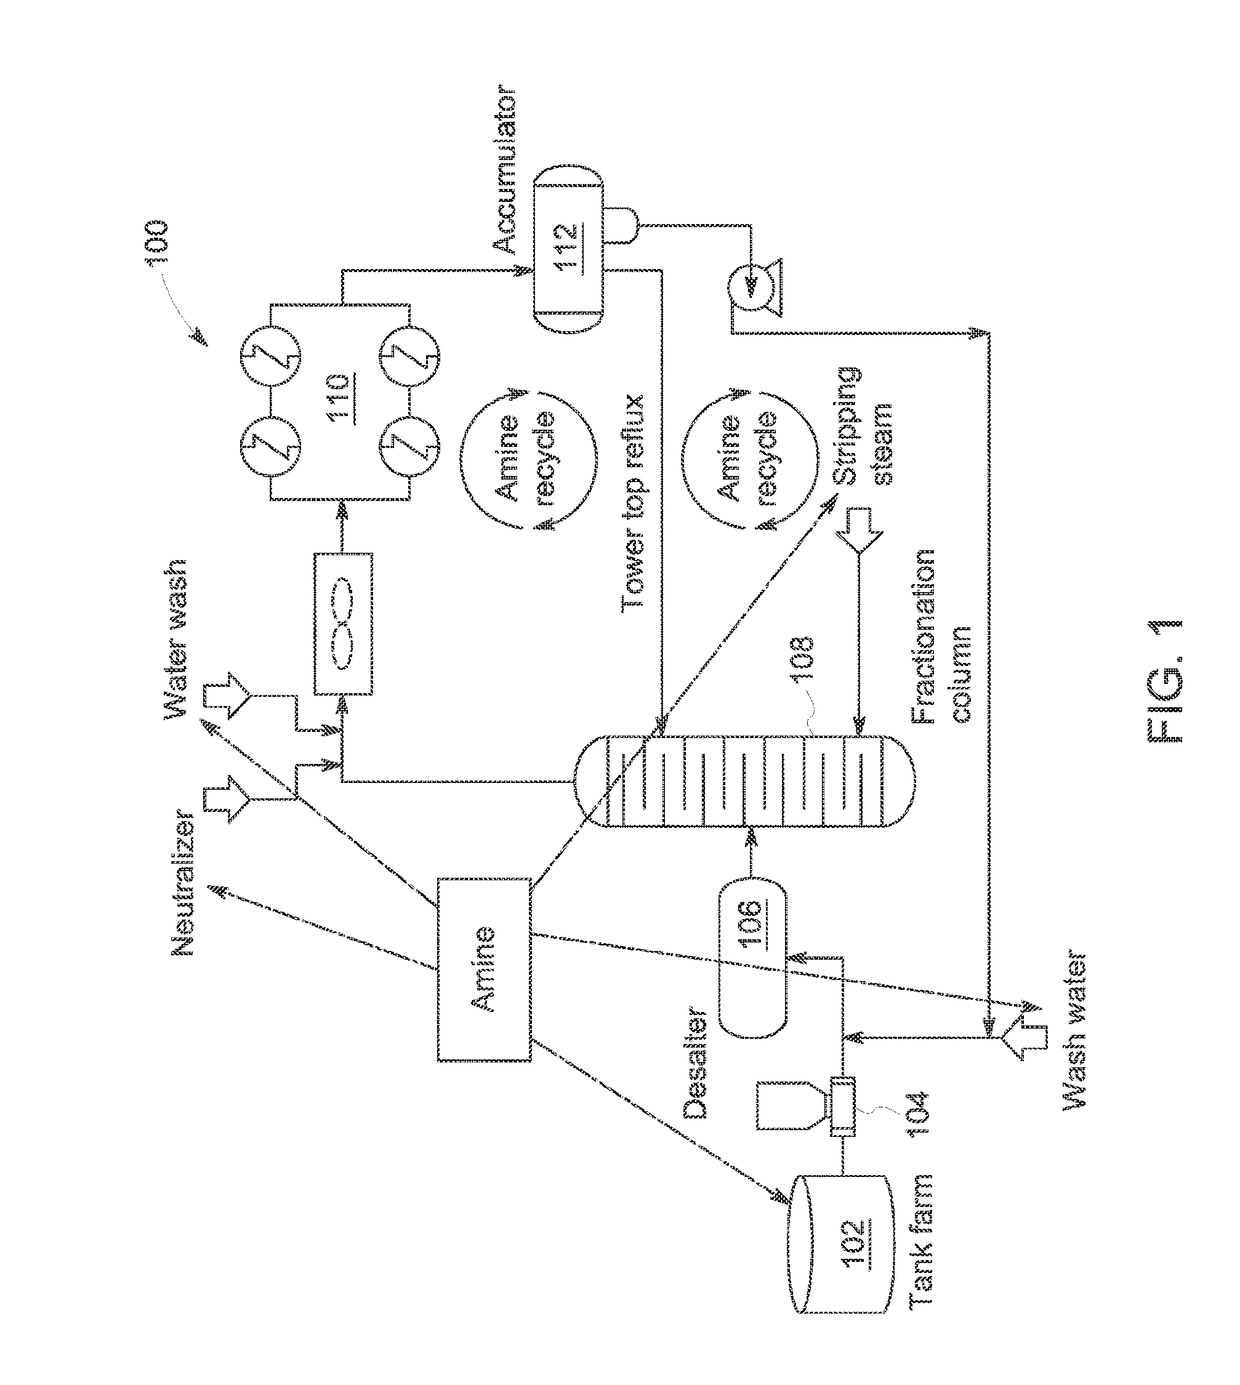 System and method of predictive analytics for control of an overhead crude section of a hydrocarbon refining process